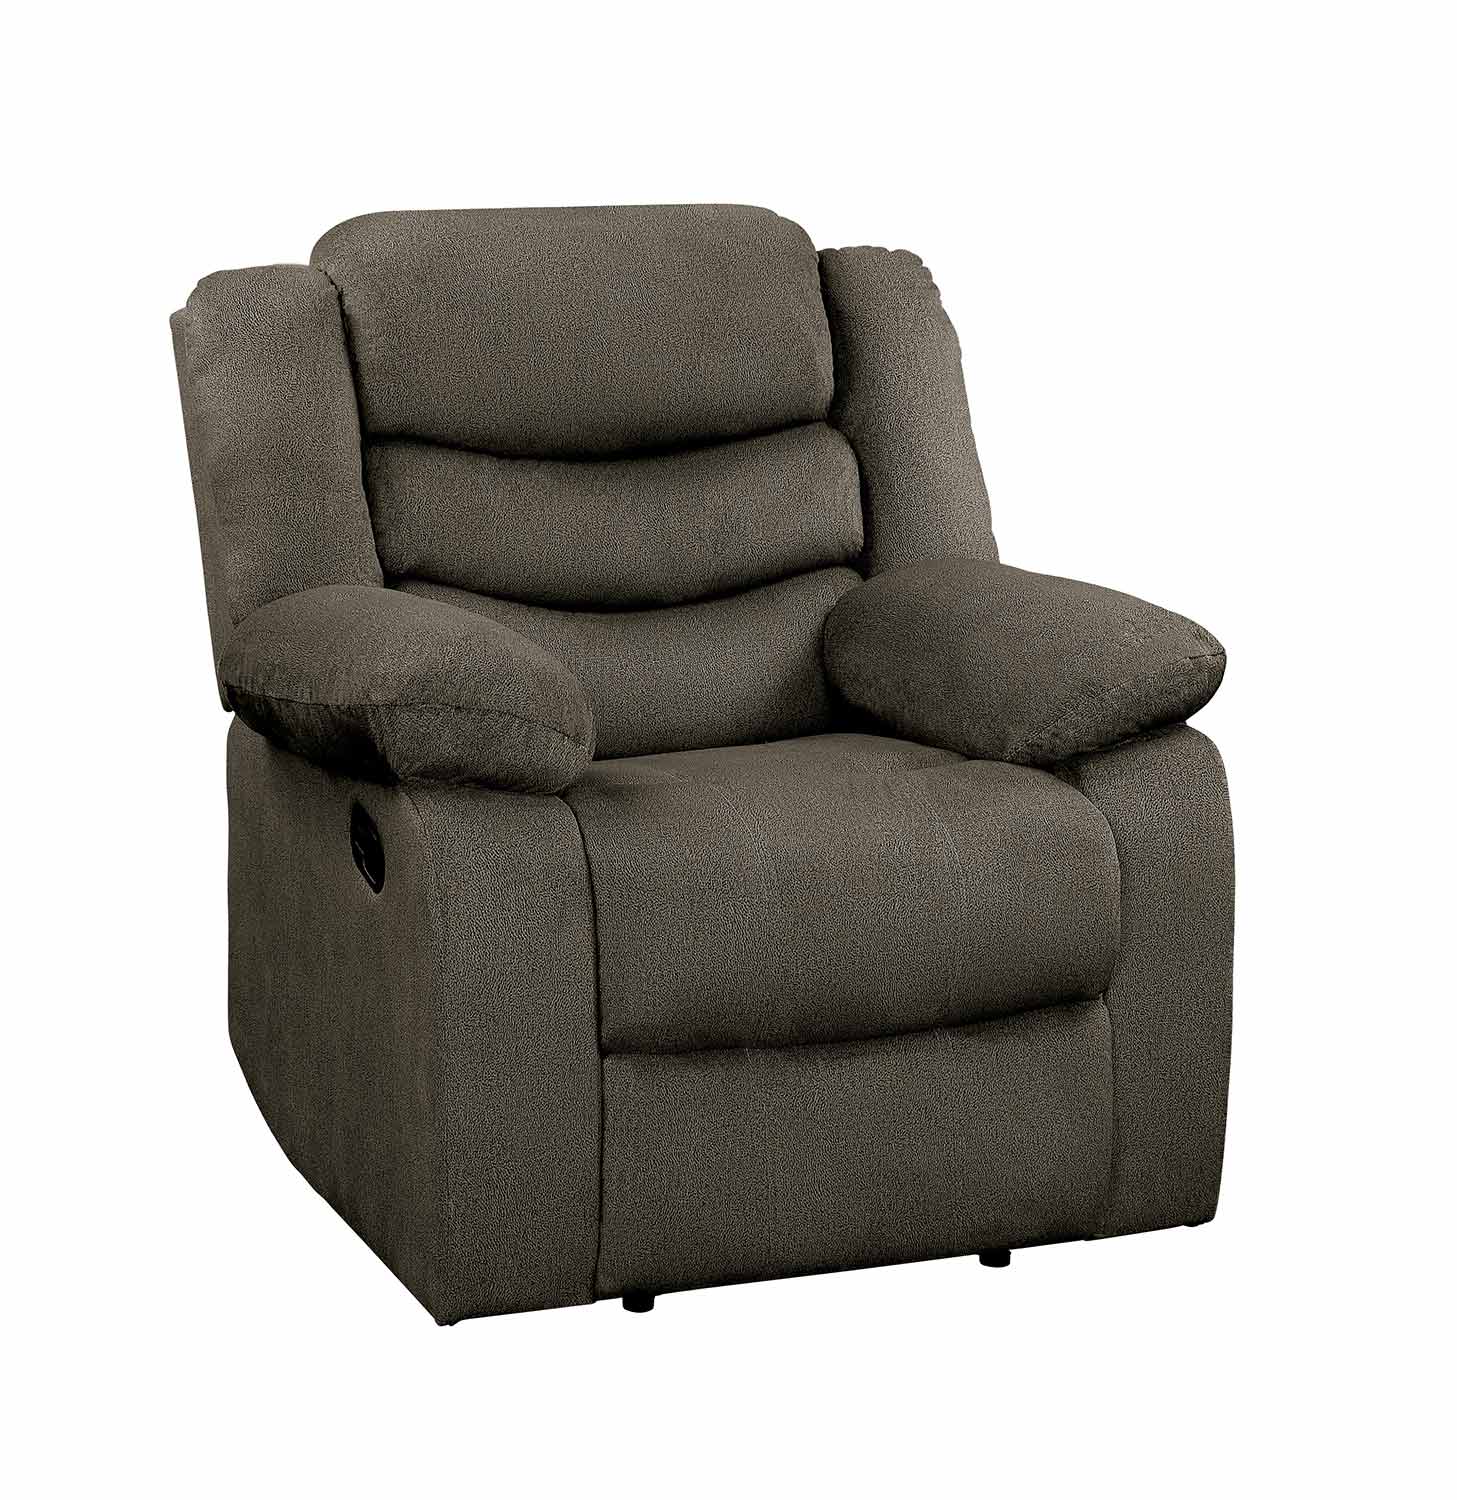 Homelegance Discus Reclining Chair - Brown